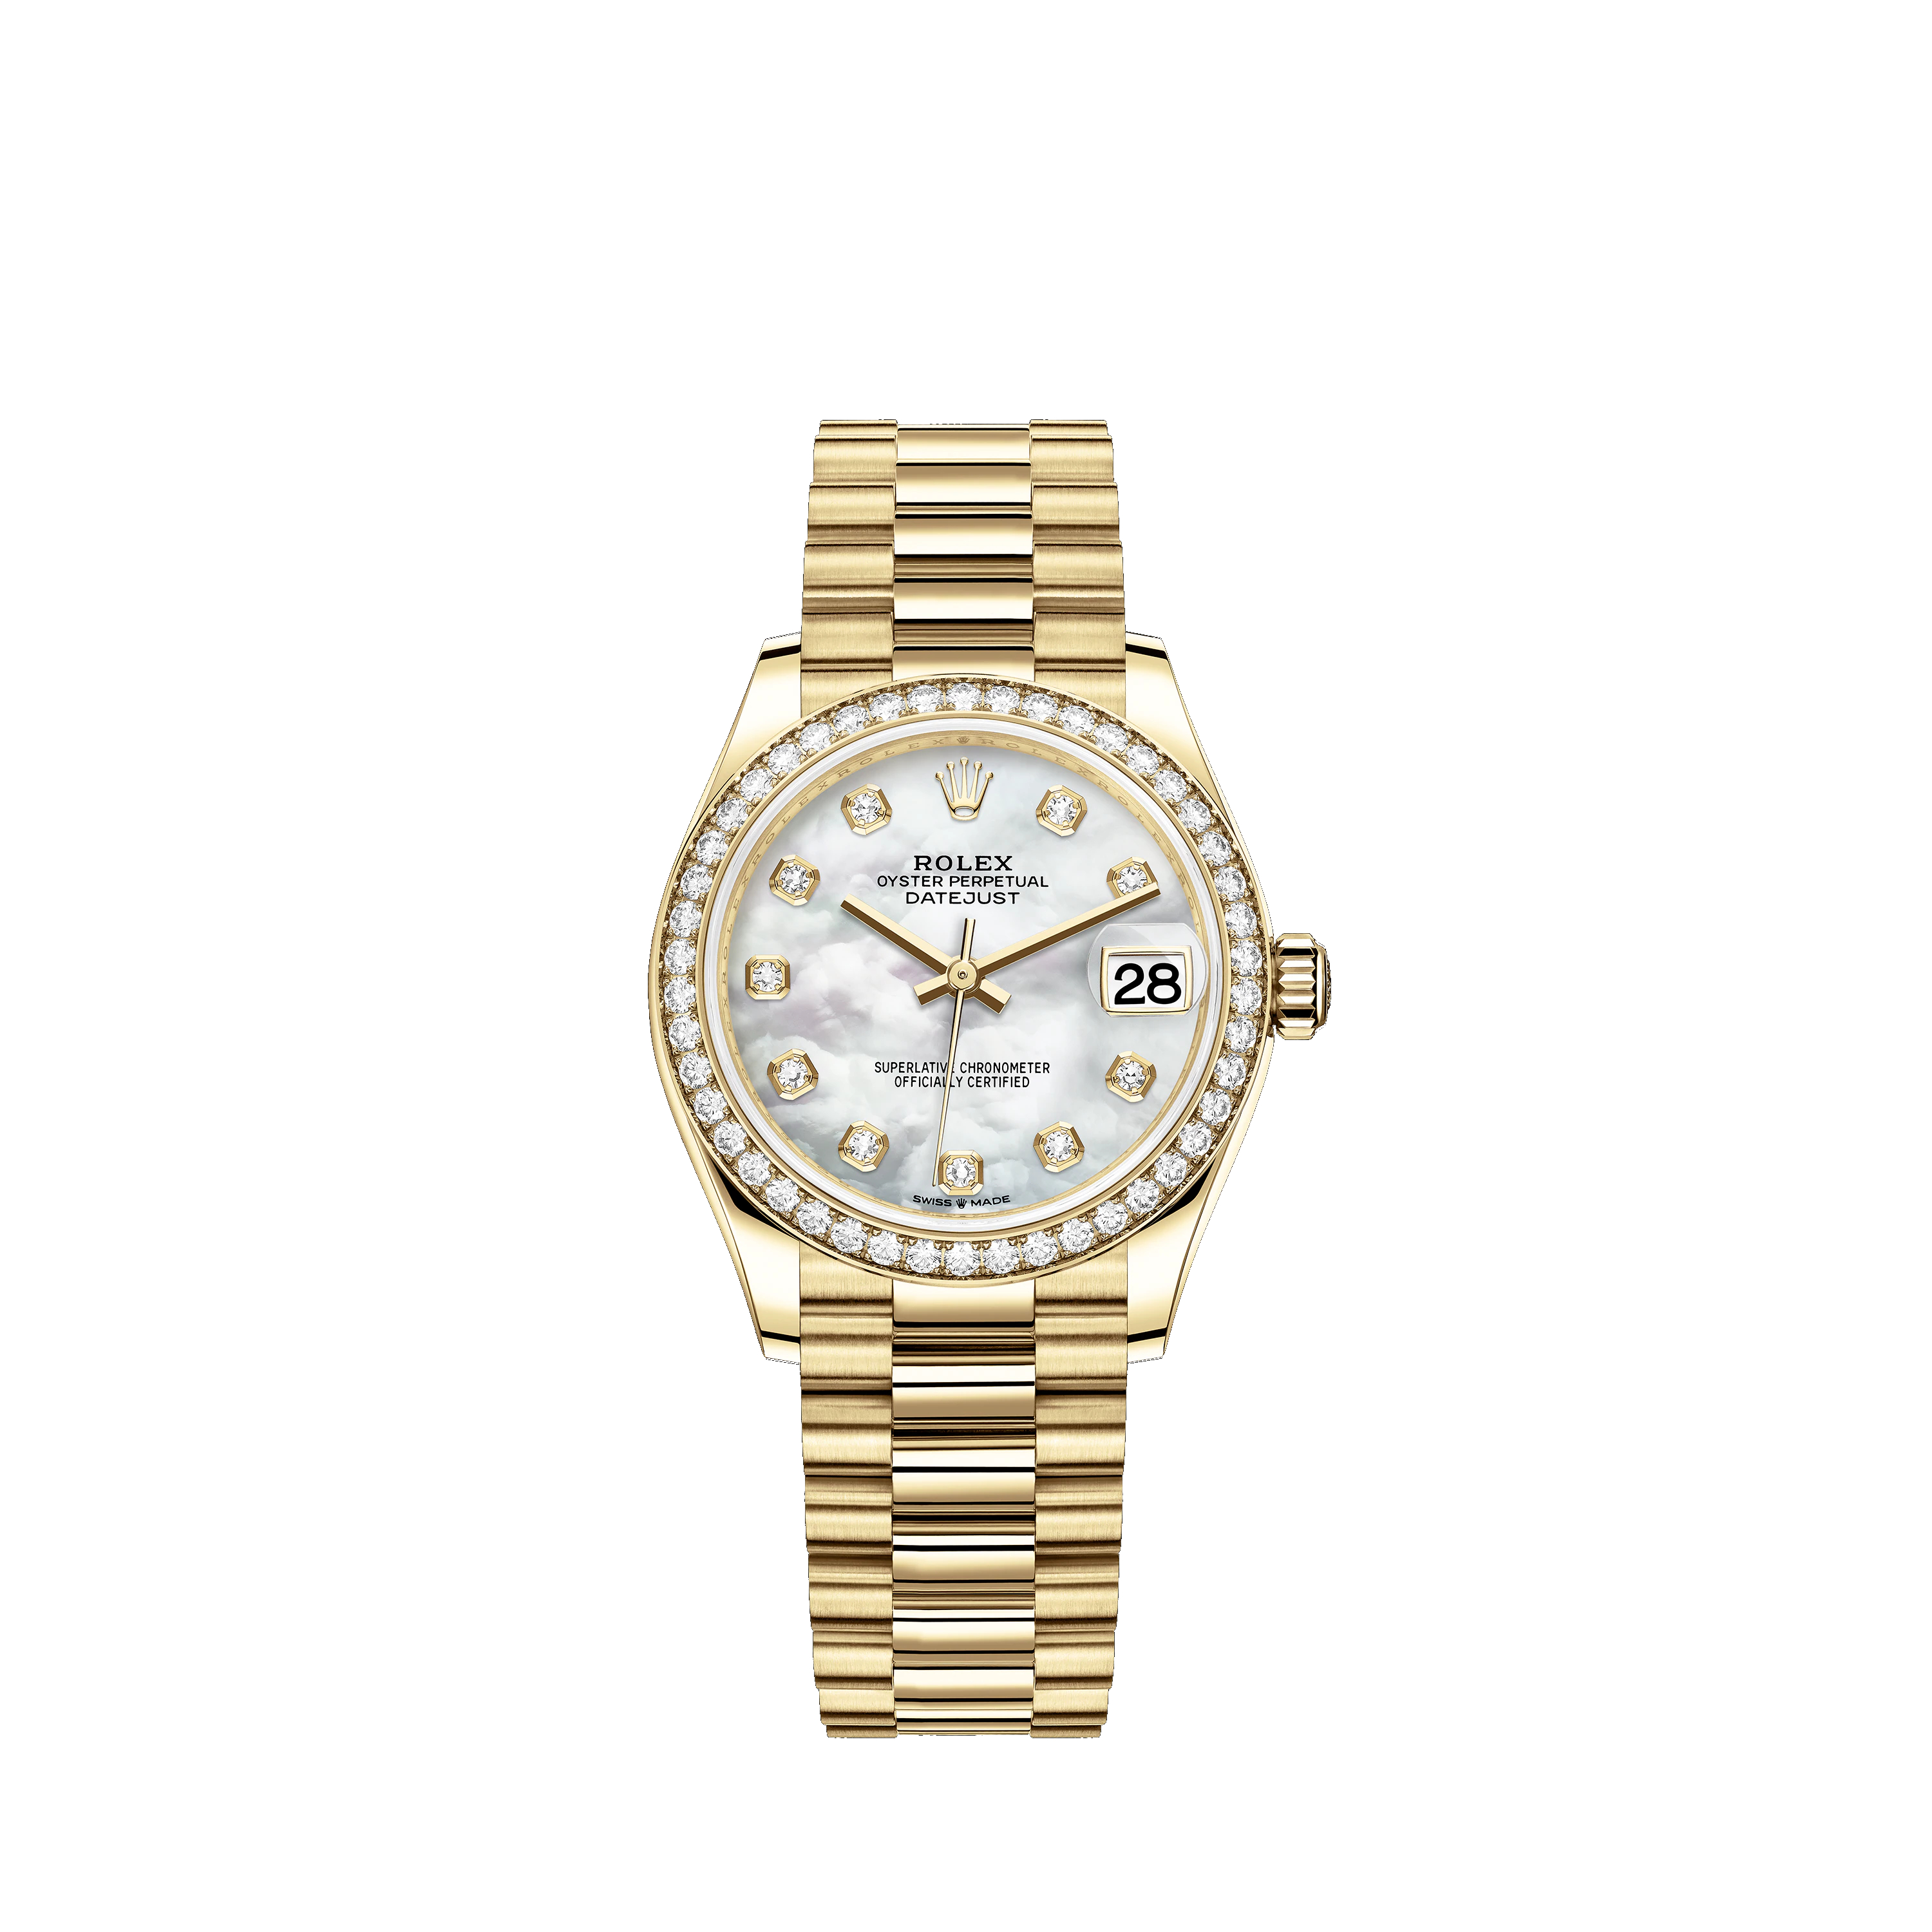 Datejust 31 278288RBR Gold & Diamonds Watch (White Mother-of-Pearl Set with Diamonds) - Click Image to Close